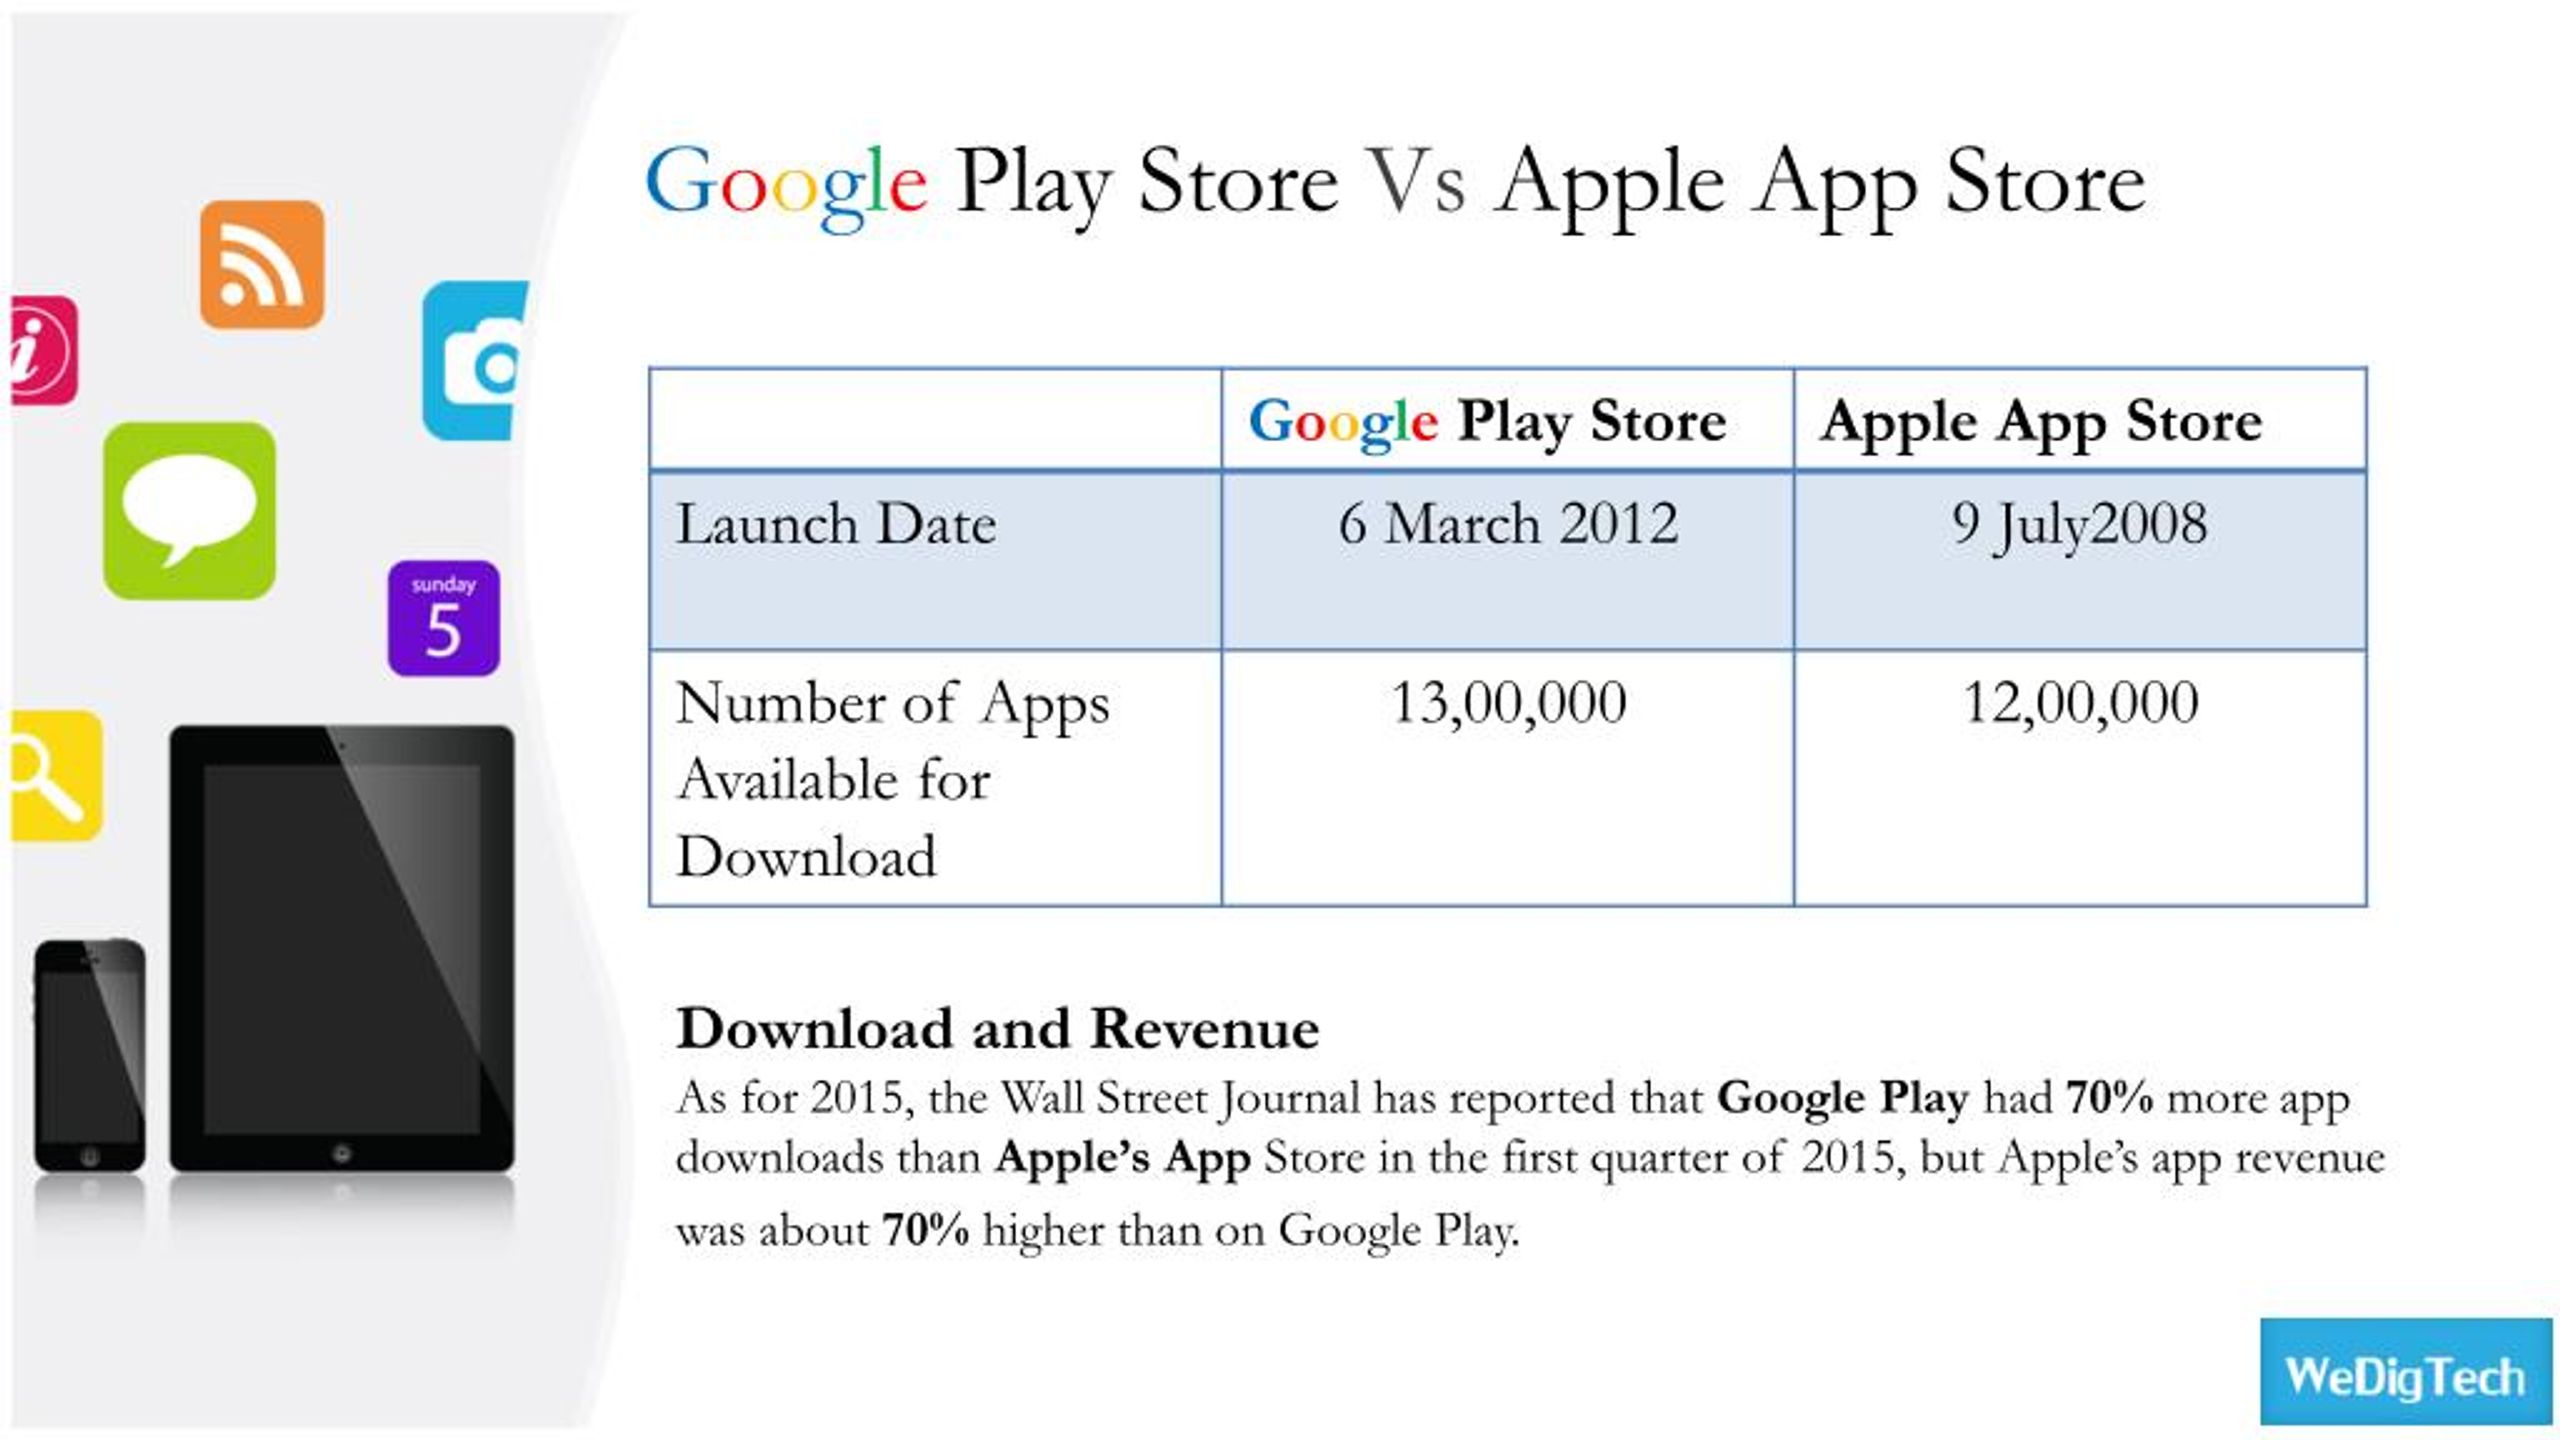 Google Play Store vs the Apple App Store – Major Difference